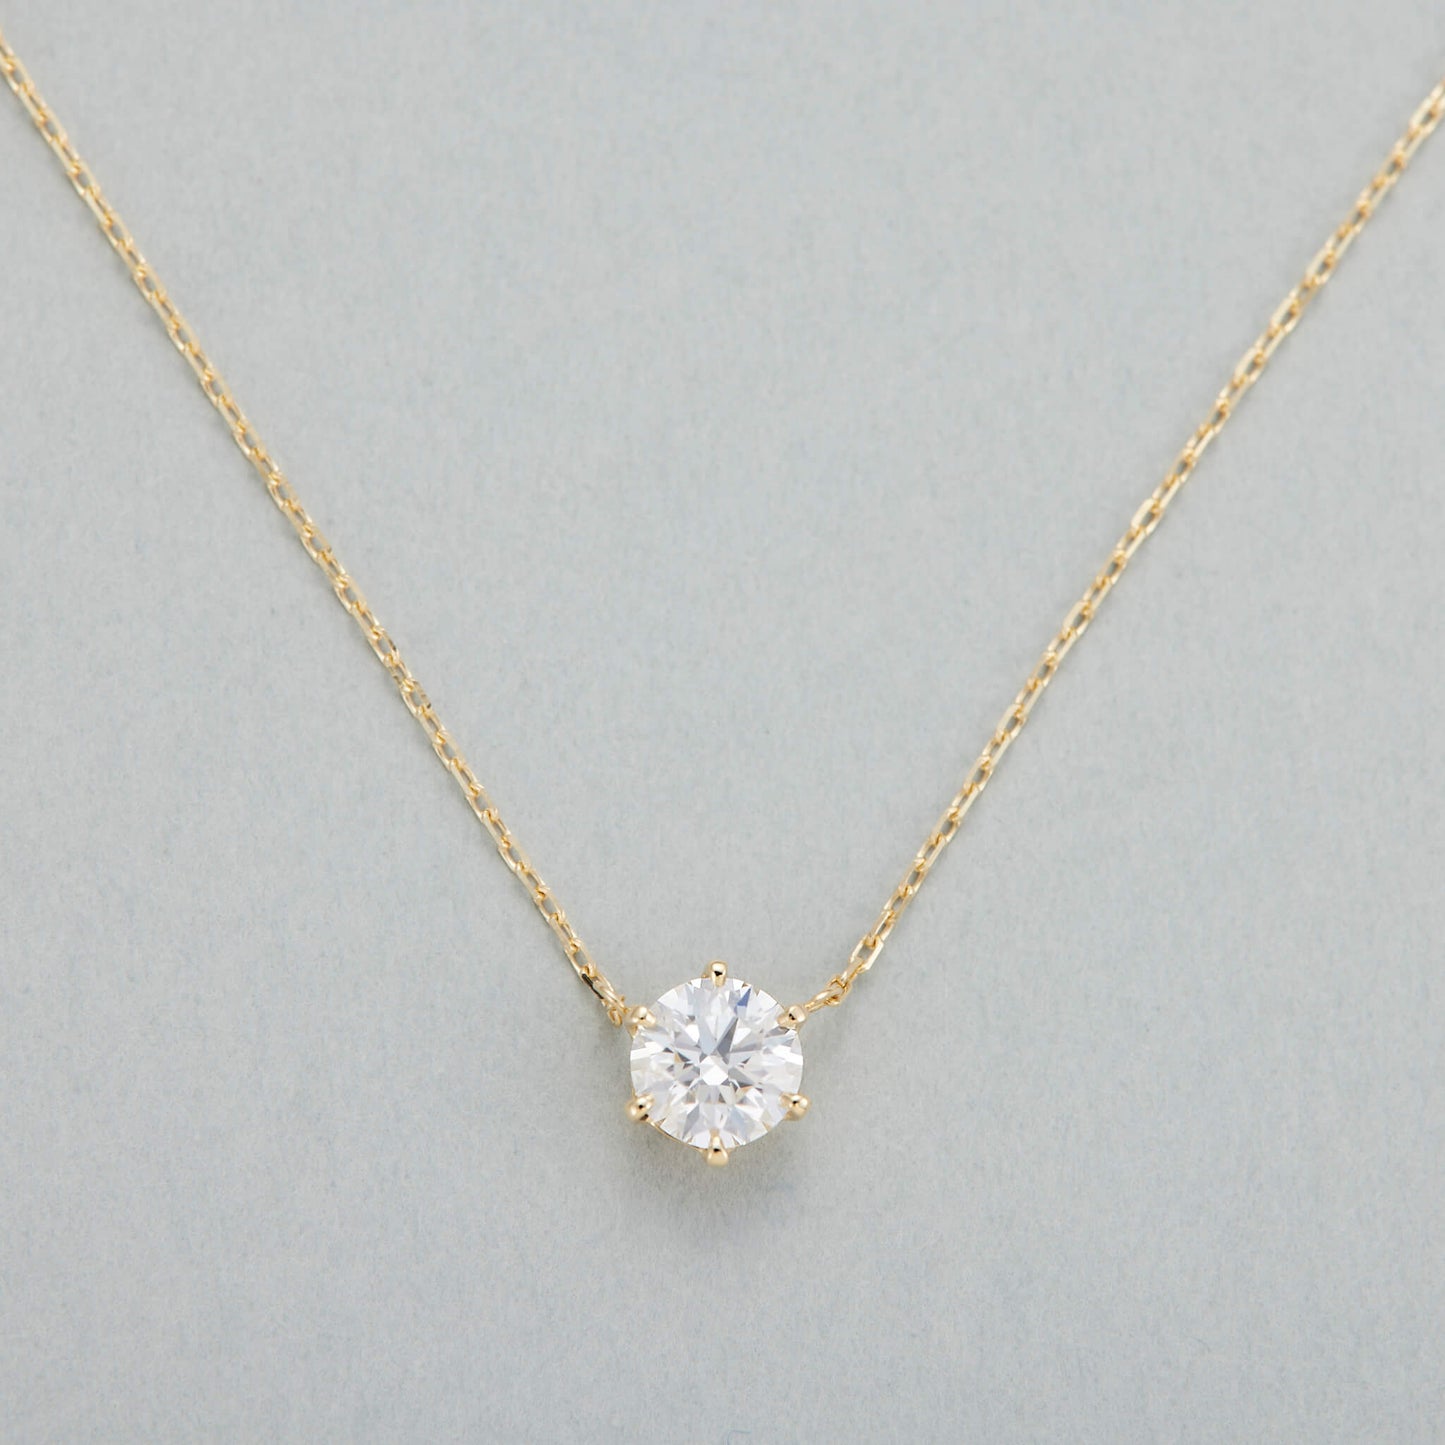 HA SIMPLY Necklace / K18 Yellow Gold / 0.5 Carat